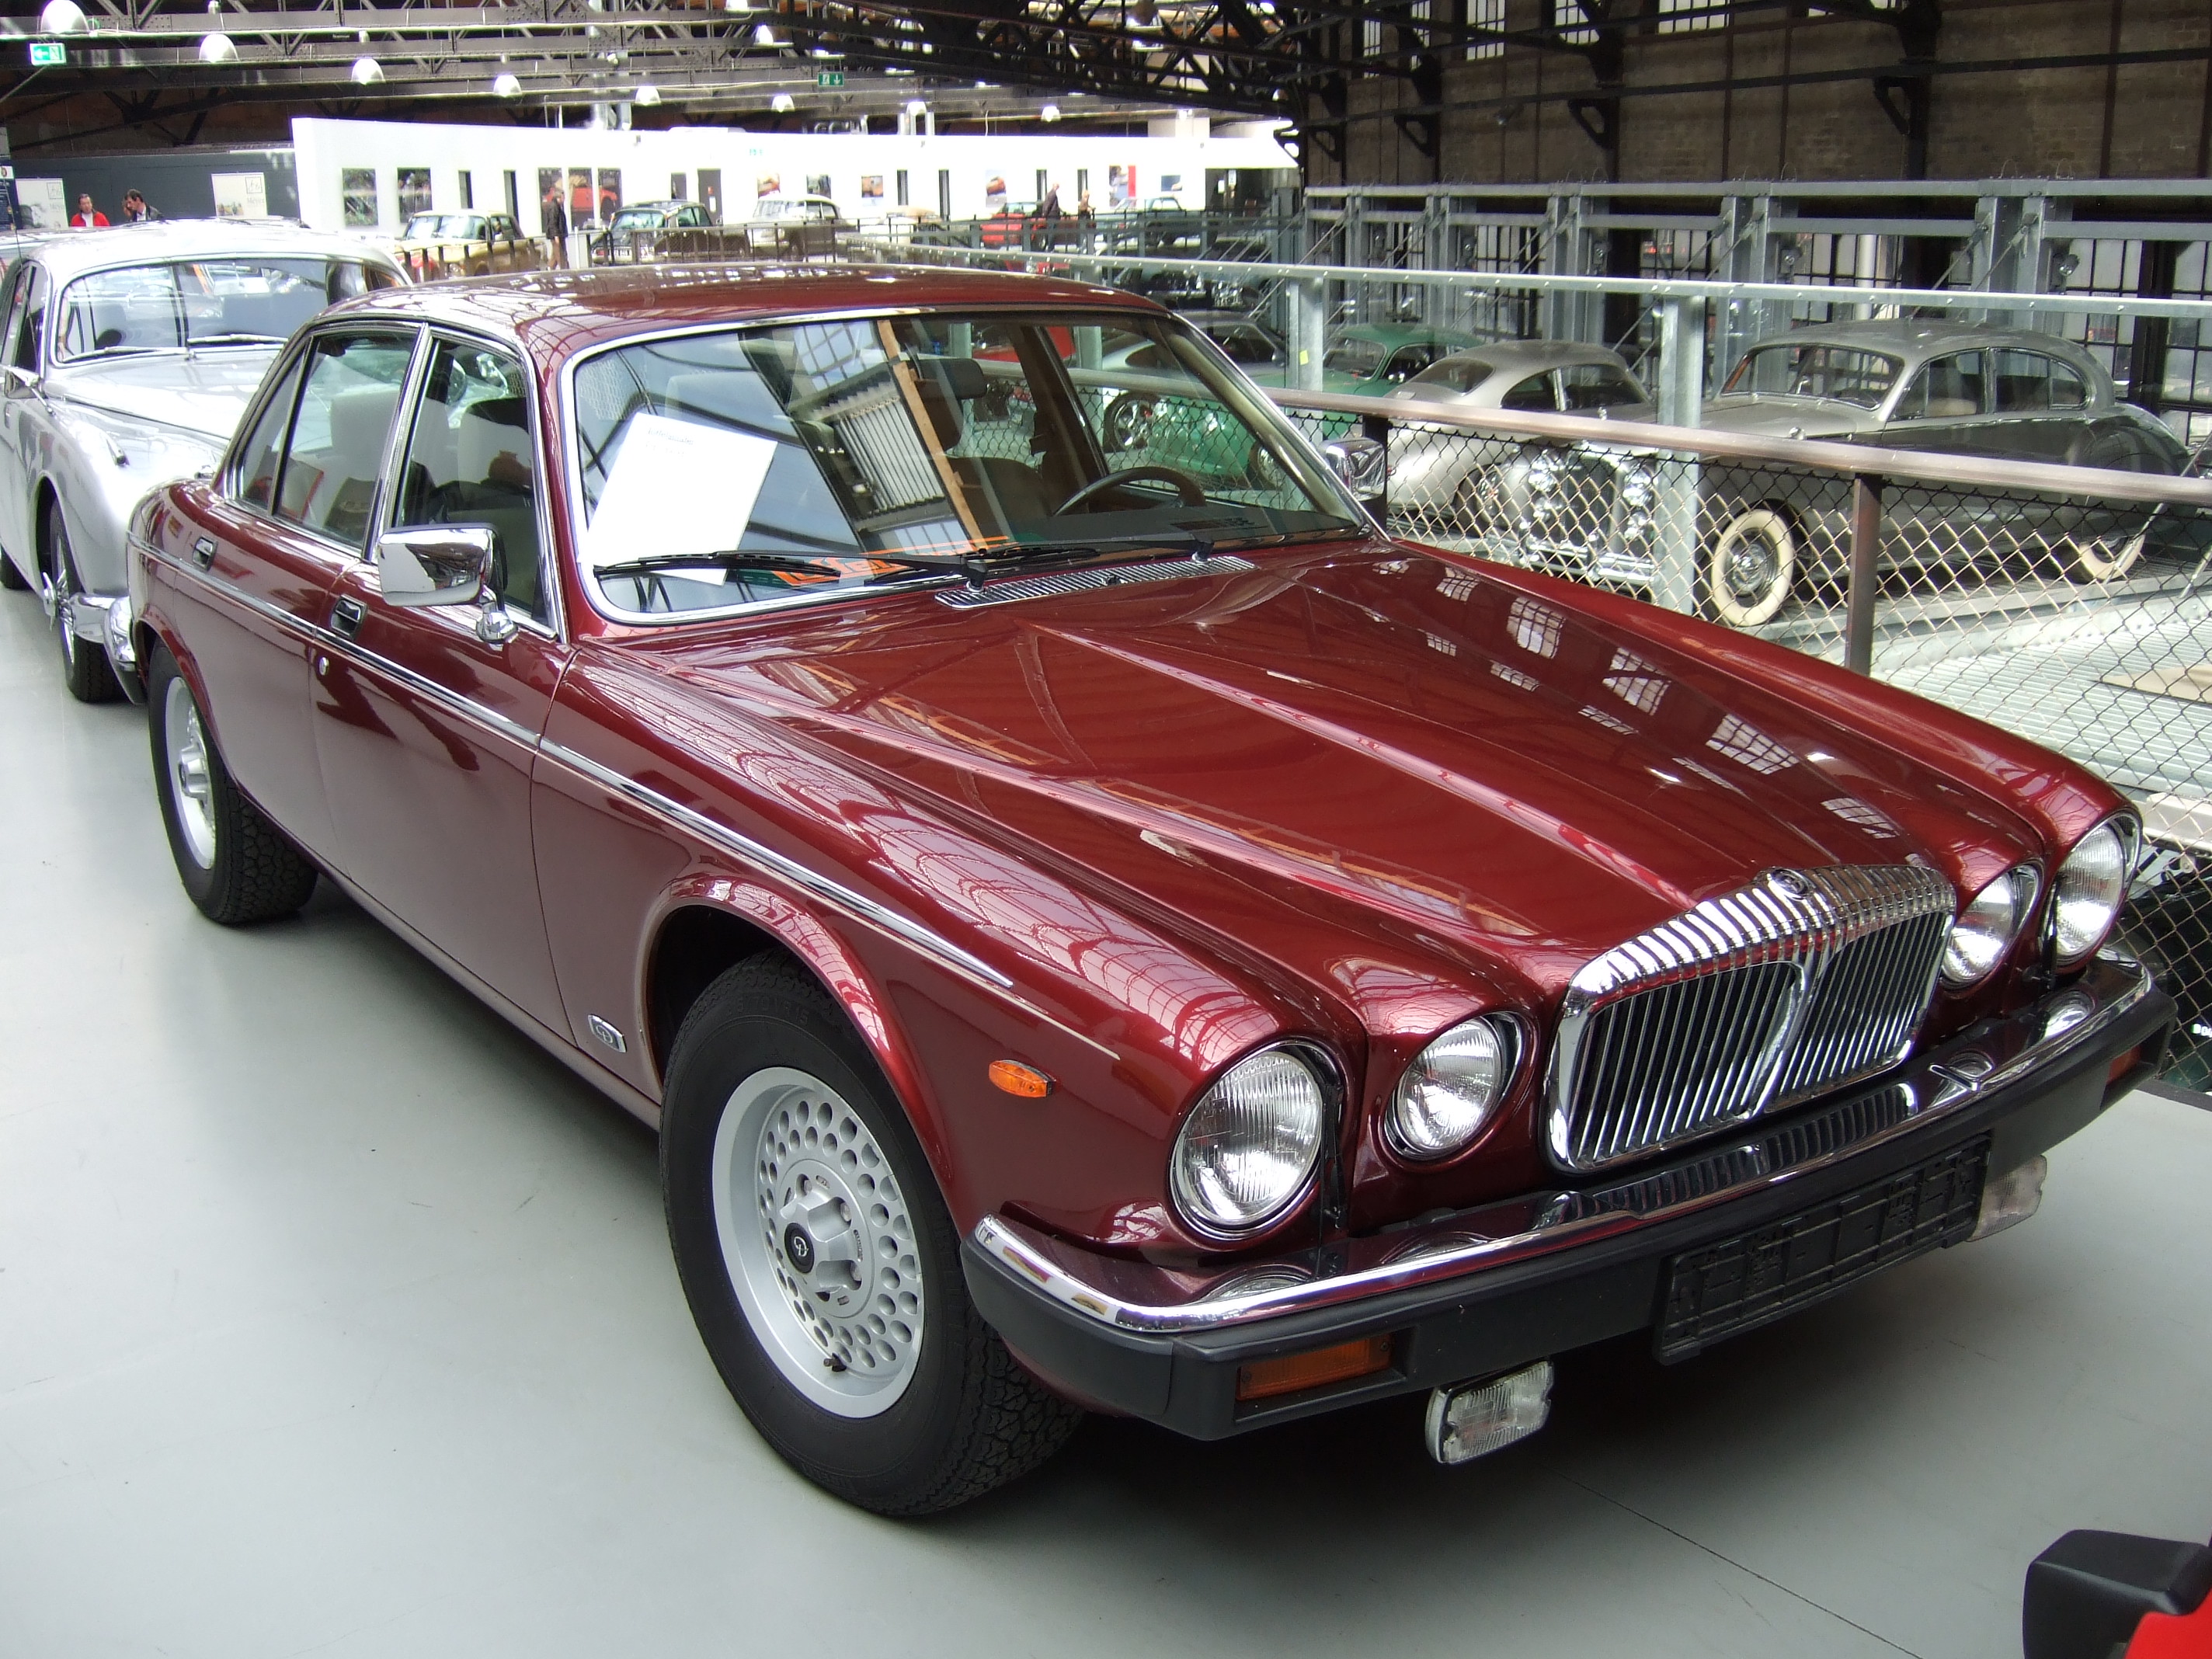 Daimler Double Six (1979-92) | Flickr - Photo Sharing!